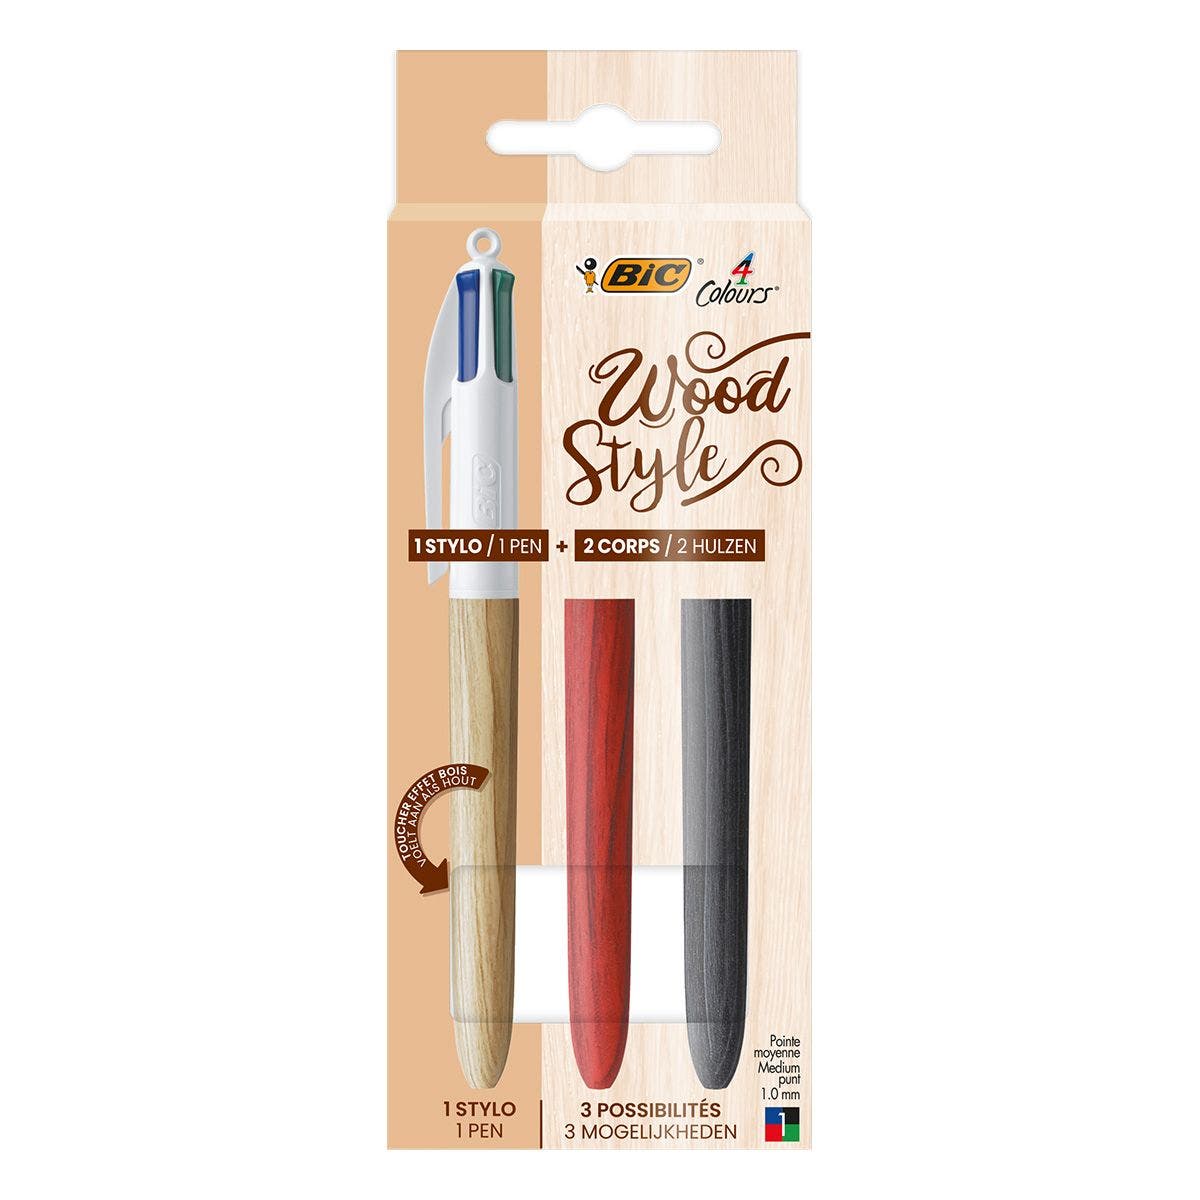 Coffret 4 couleurs® BIC x OMY, 100% made in France 🇫🇷